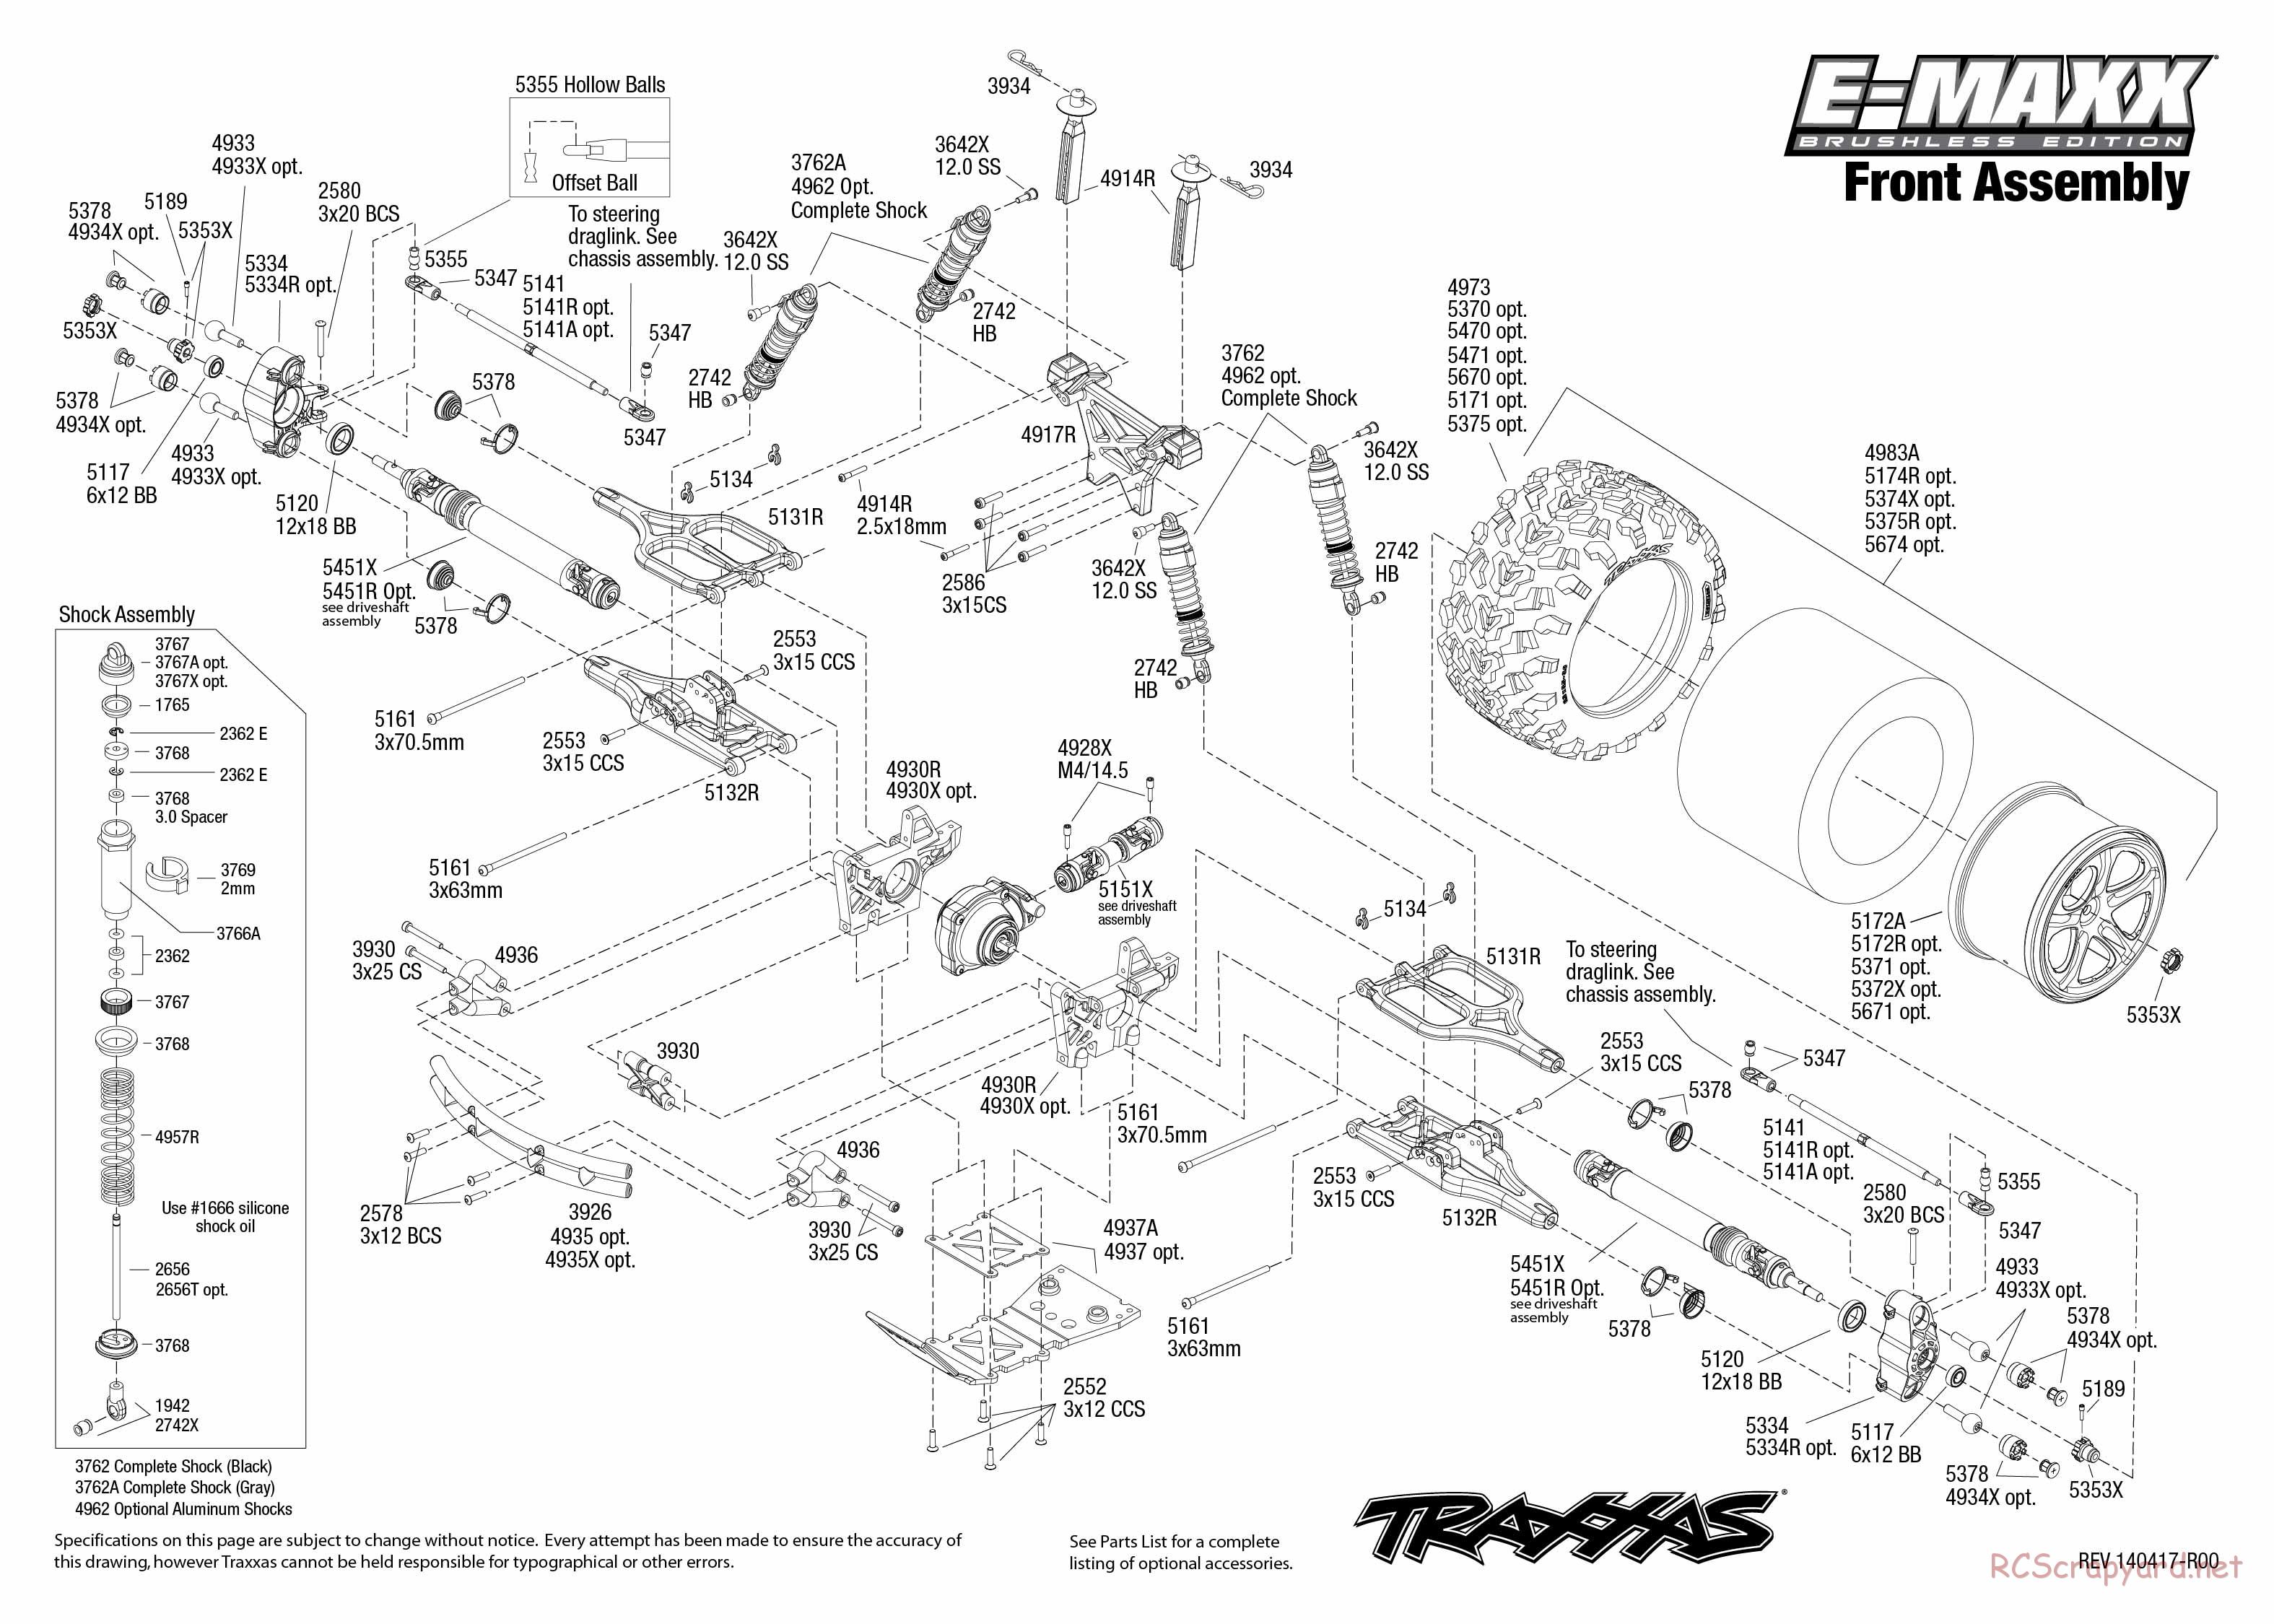 Traxxas - E-Maxx Brushless (2014) - Exploded Views - Page 2